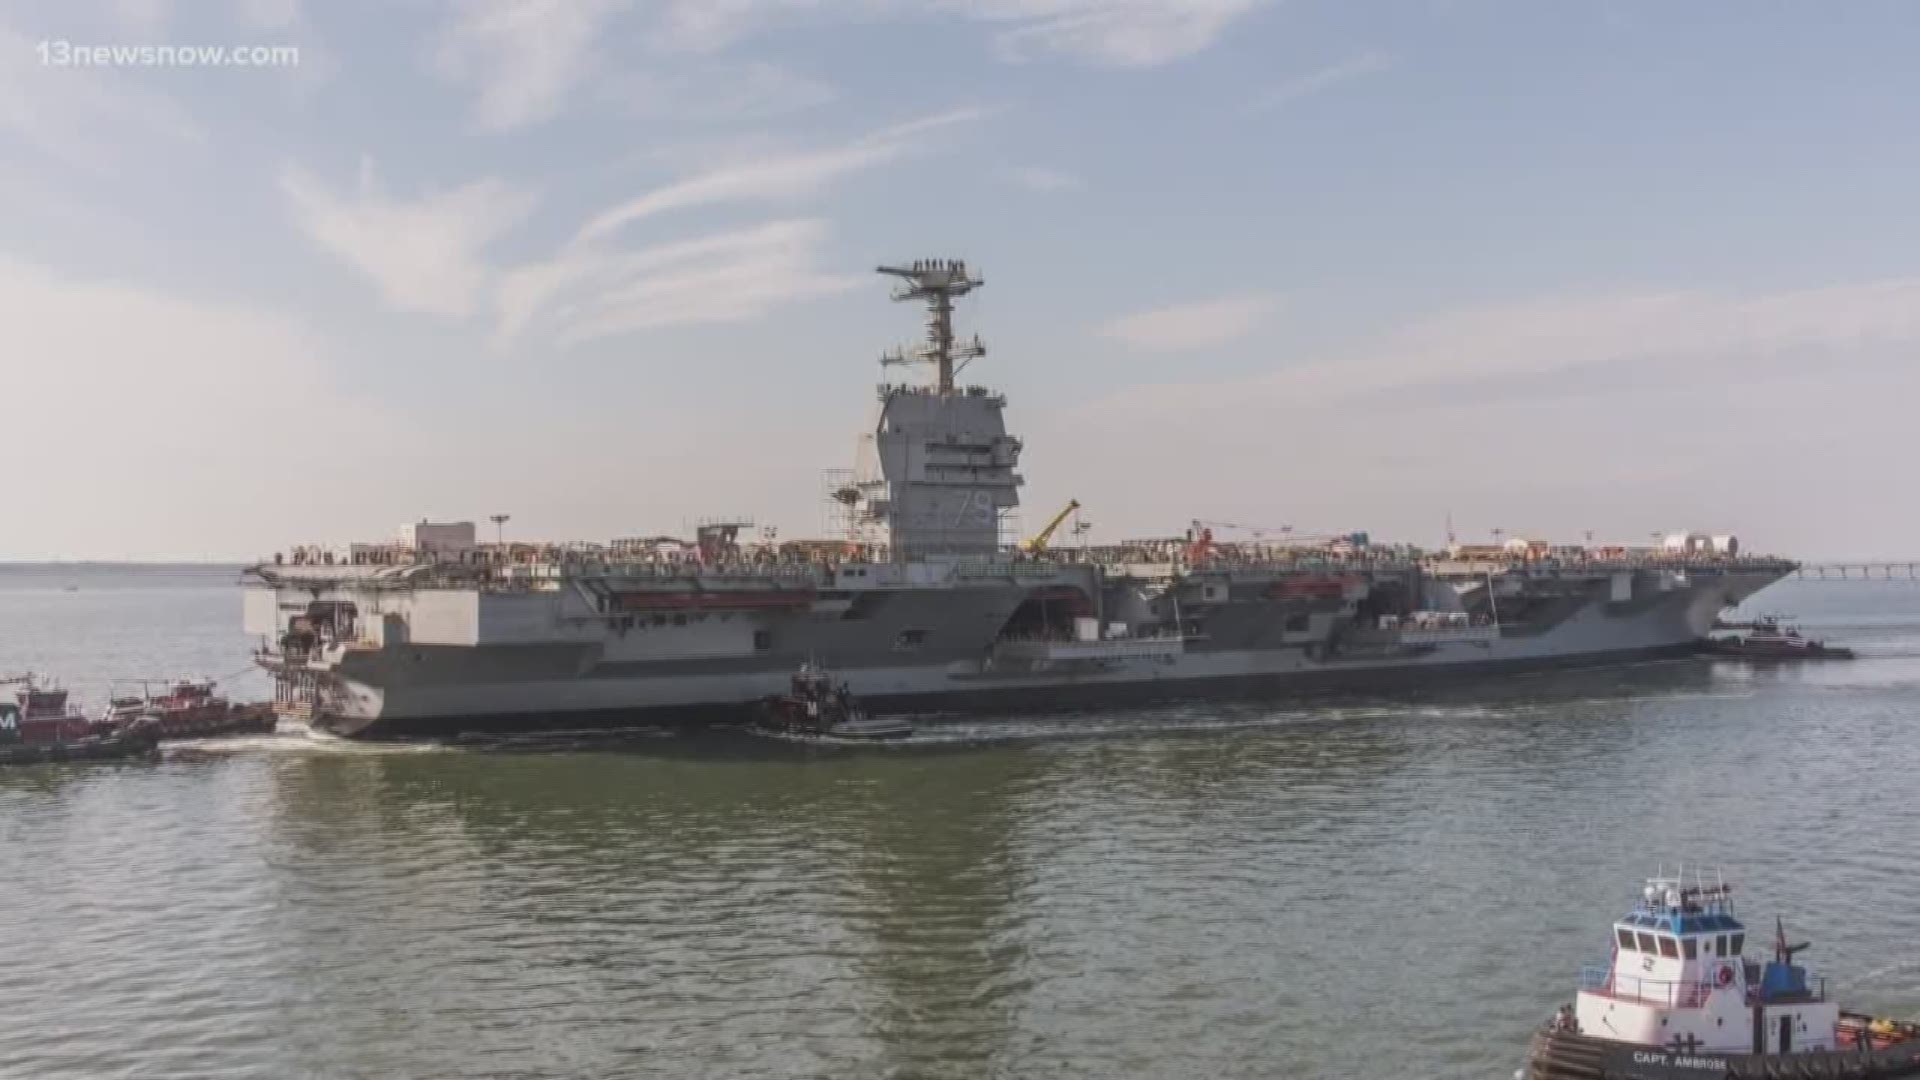 A second employee at Newport News Shipbuilding confirmed with COVID-19. A worker from Norfolk Naval Shipyard, on assignment in New York state, also tests positive.